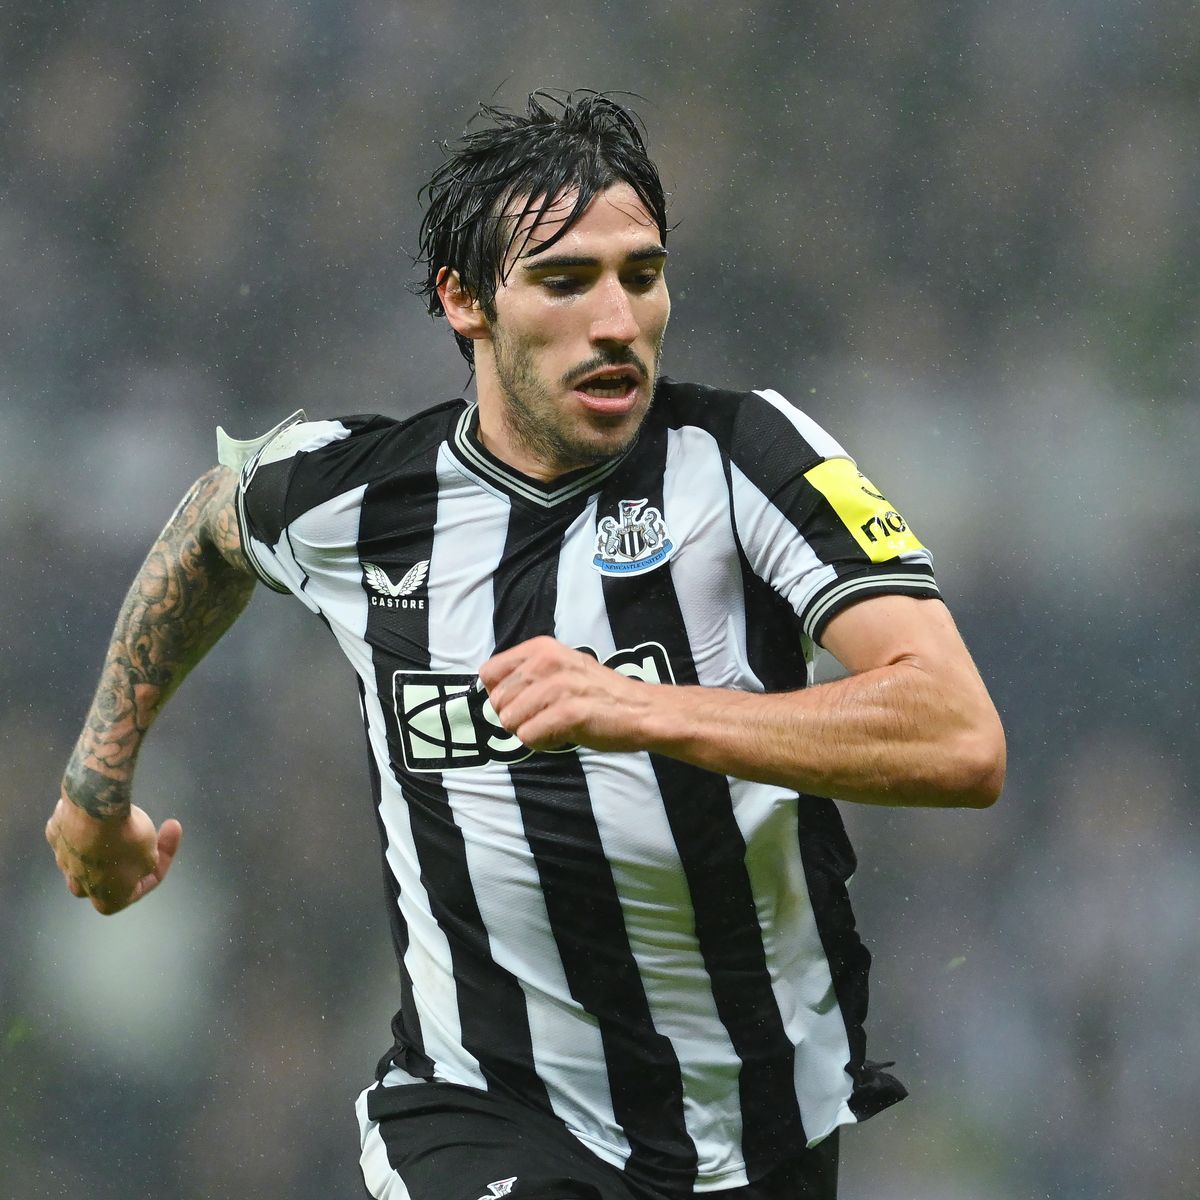 Tonali was also praised for his 'extraordinary cooperation', including self-reporting the breaches....and for the fact he has shown remorse. Hopefully this matter is now closed for both the player and #NUFC. We all wish him well in his gambling addiction recovery.